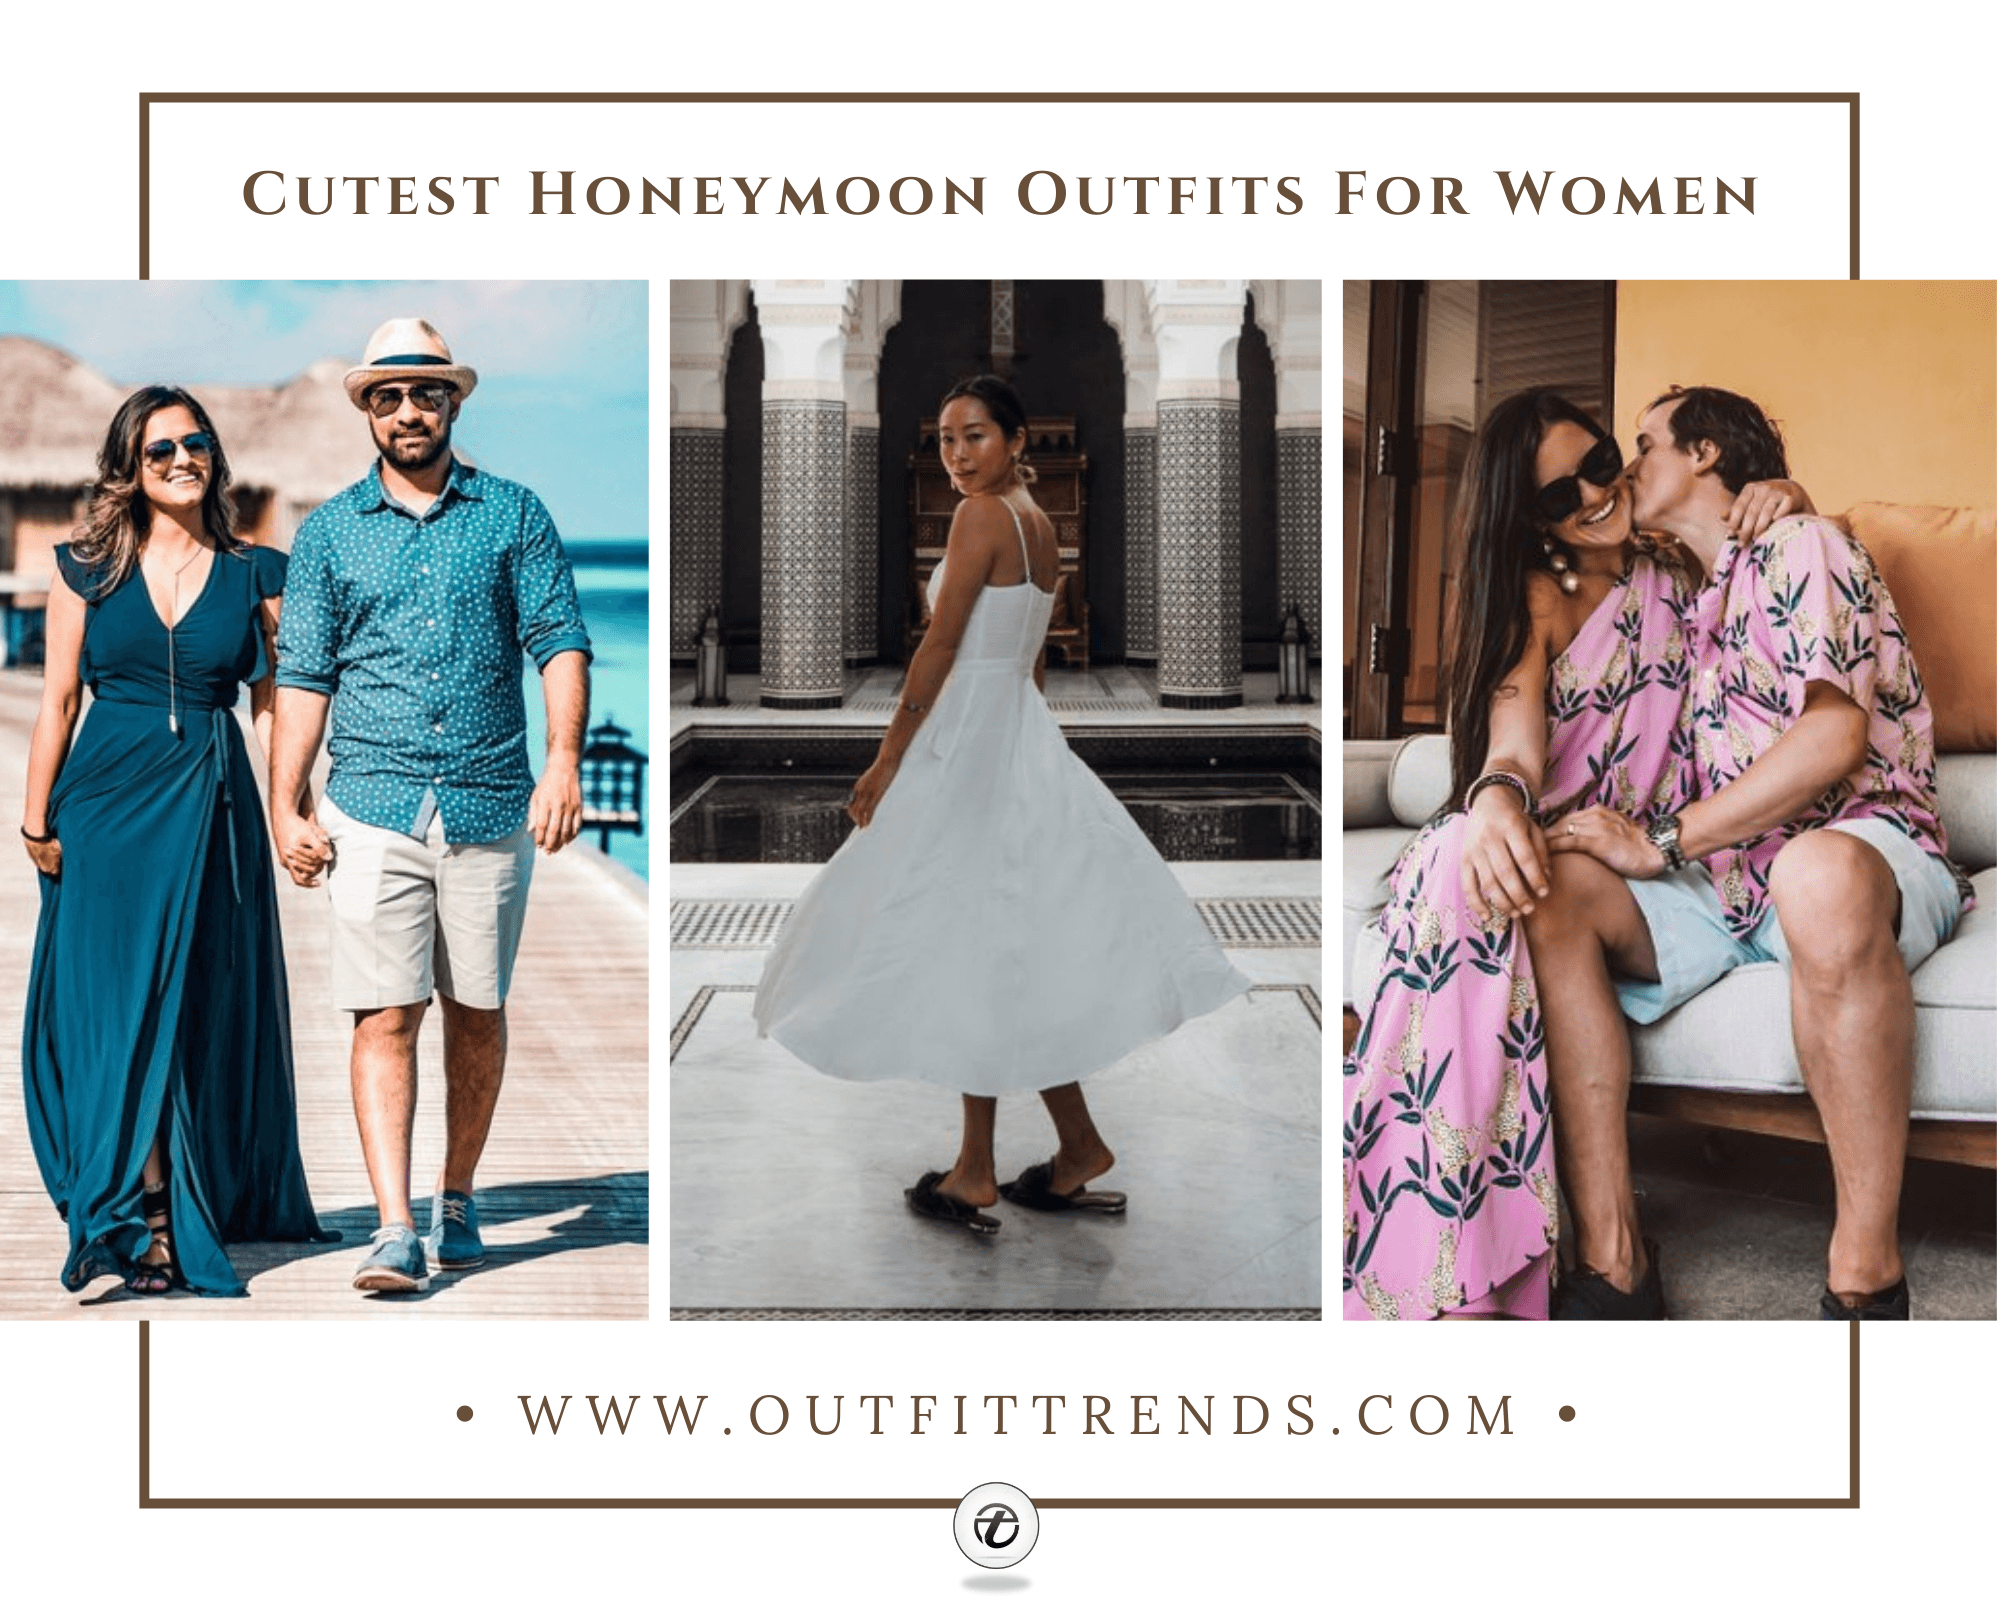 Women Honeymoon Clothes – 23 Outfits to Pack for Honeymoon